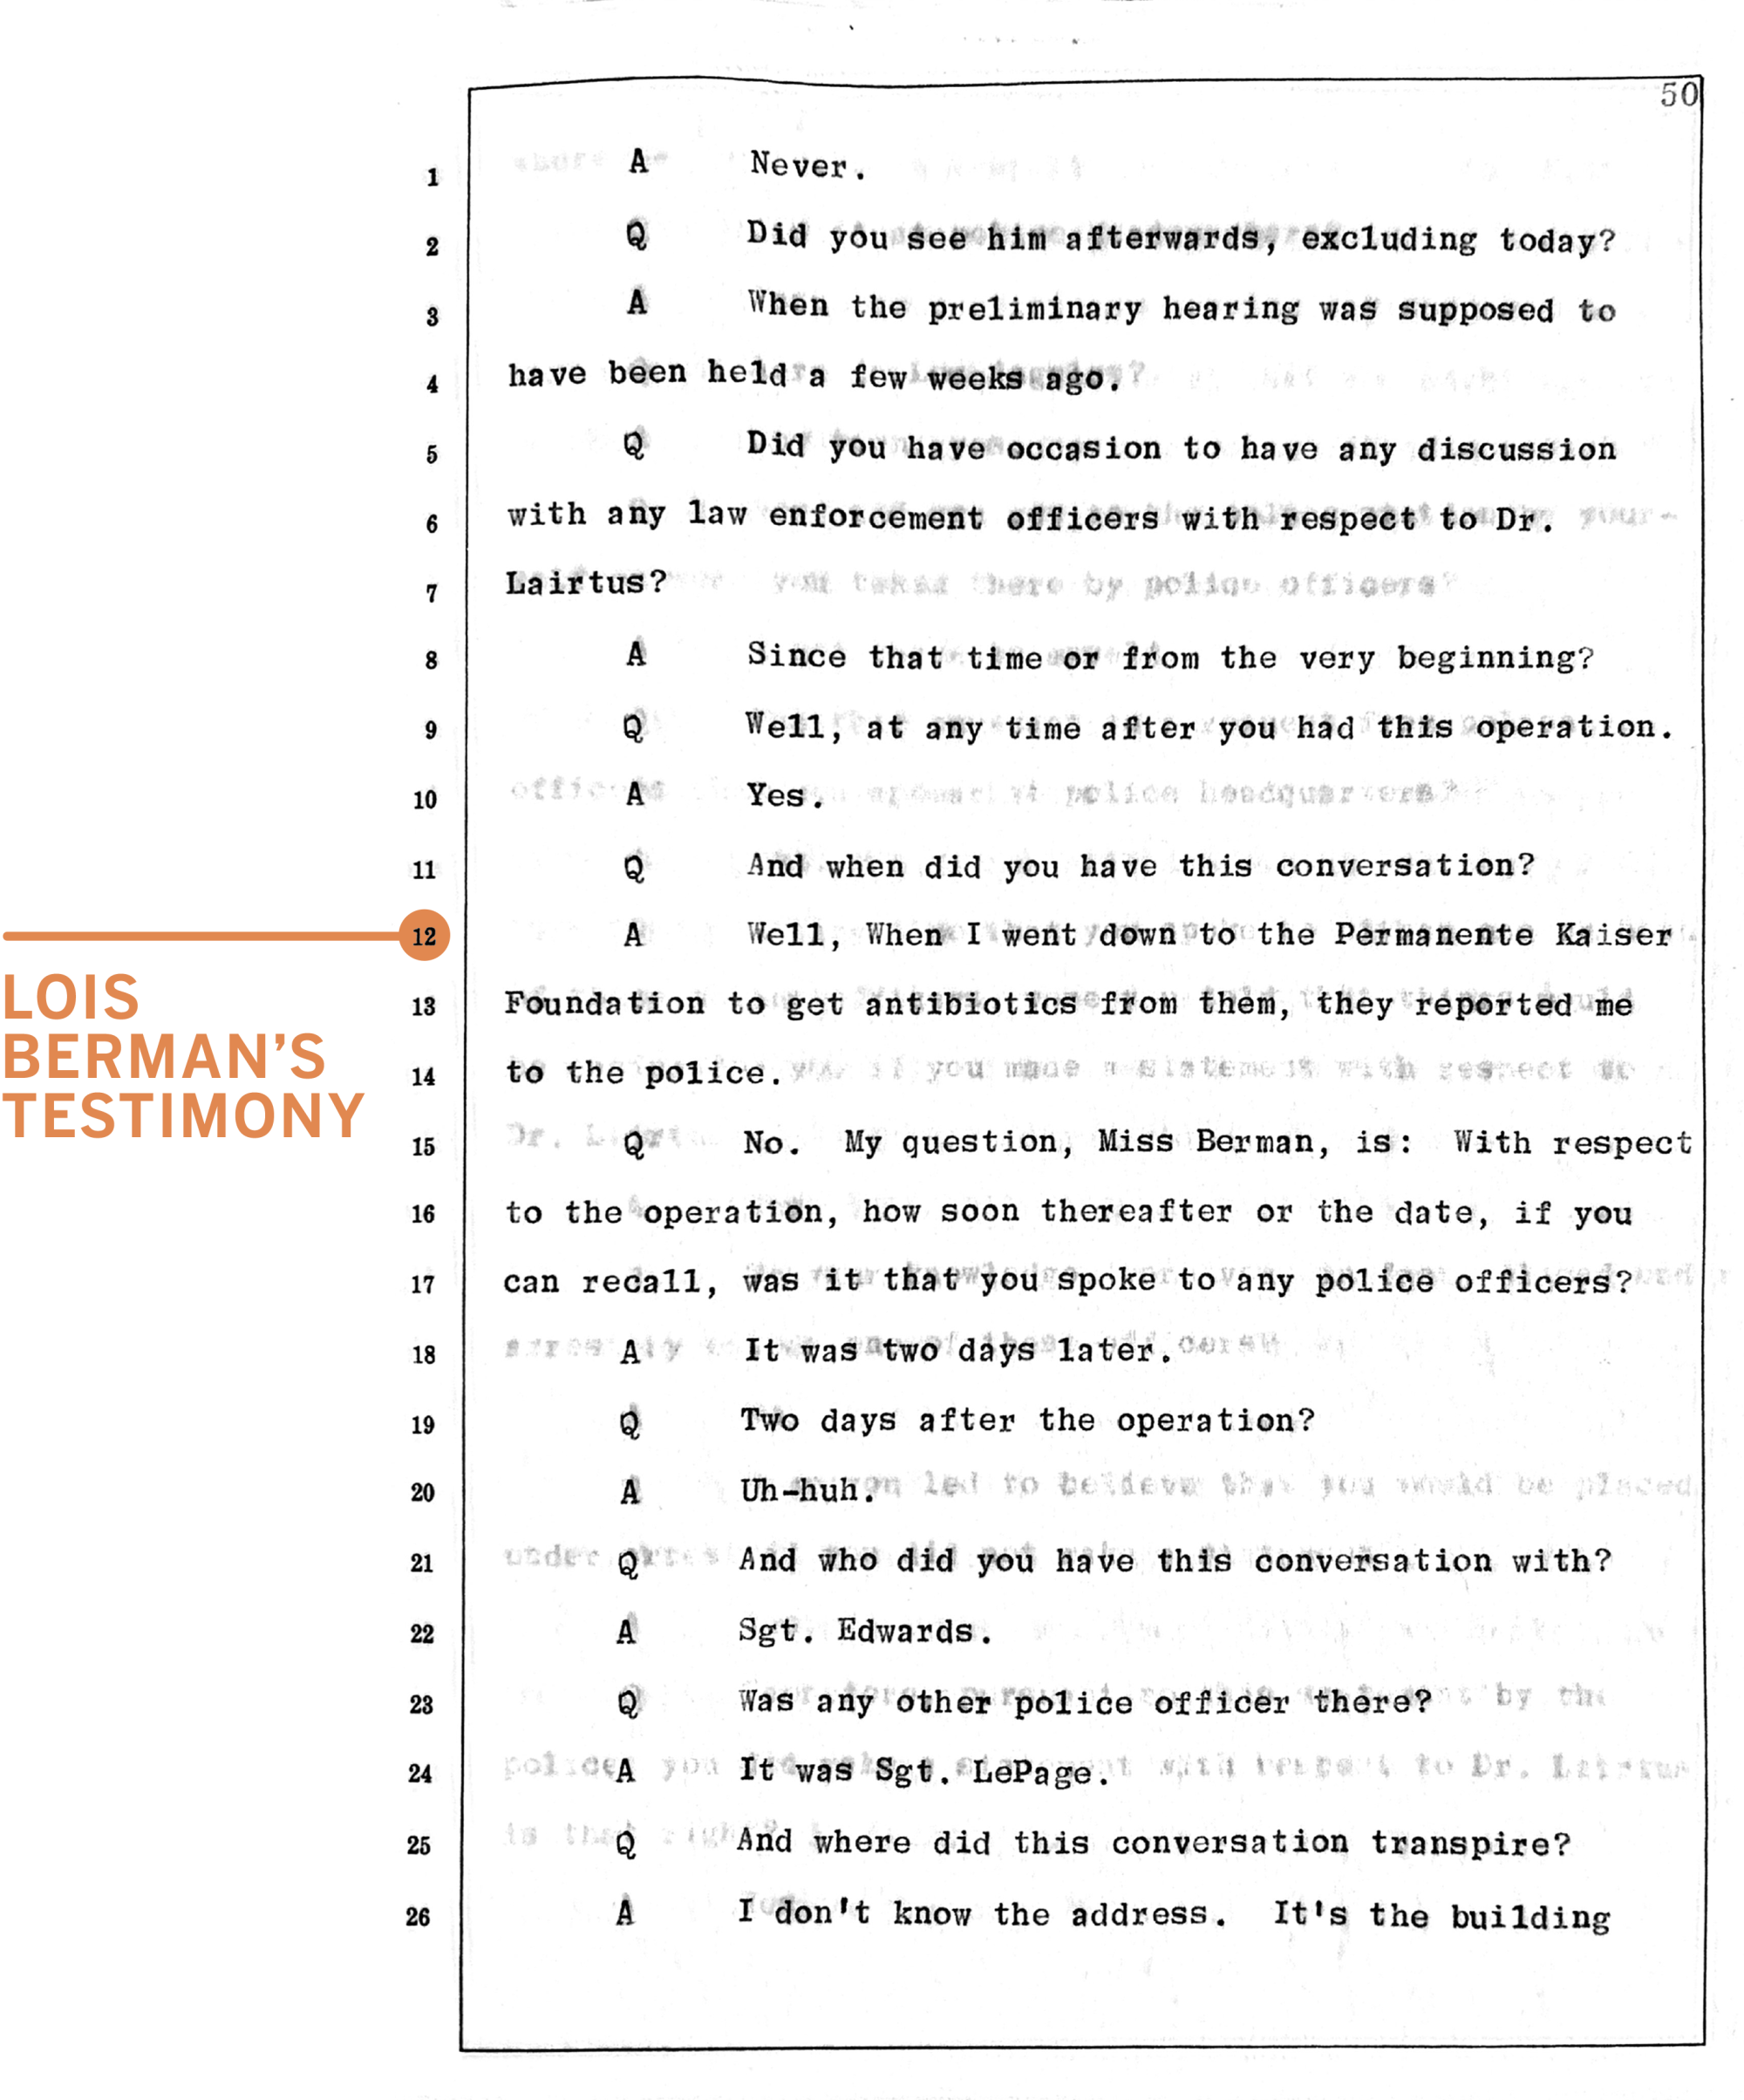 A page of court testimony. "I went down to Permanente Kaiser to get antibiotics from them, they reported me to the police."